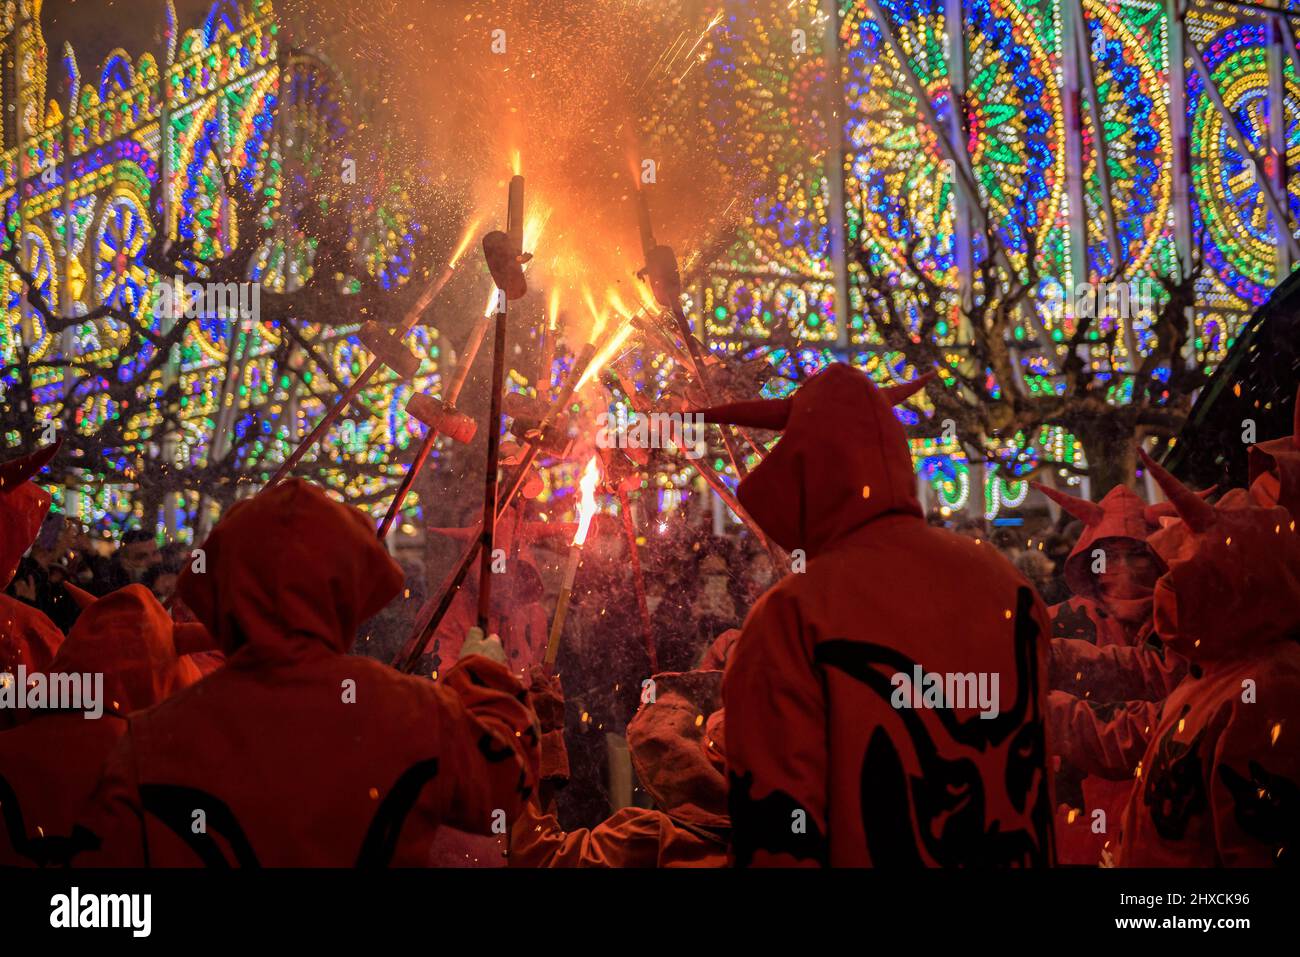 The Valls Devils in the Procession of the 2022 Valls Decennial Festival, in honor of the Virgin of the Candlemas in Valls, Tarragona, Catalonia, Spain Stock Photo